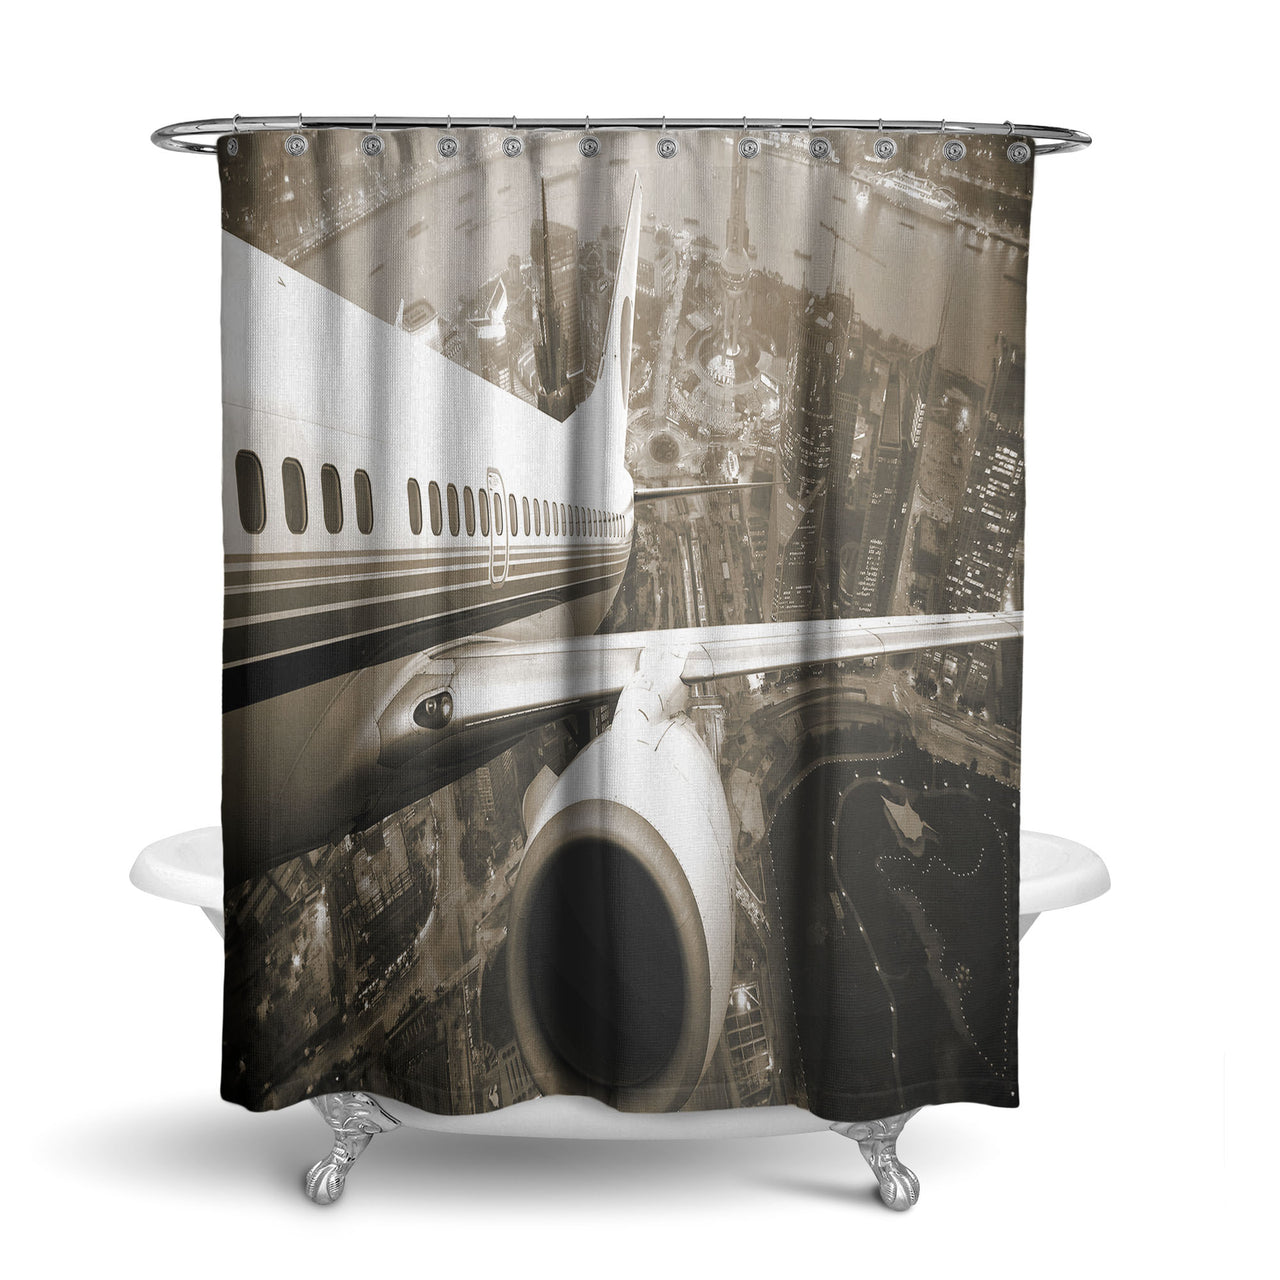 Departing Aircraft & City Scene behind Designed Shower Curtains